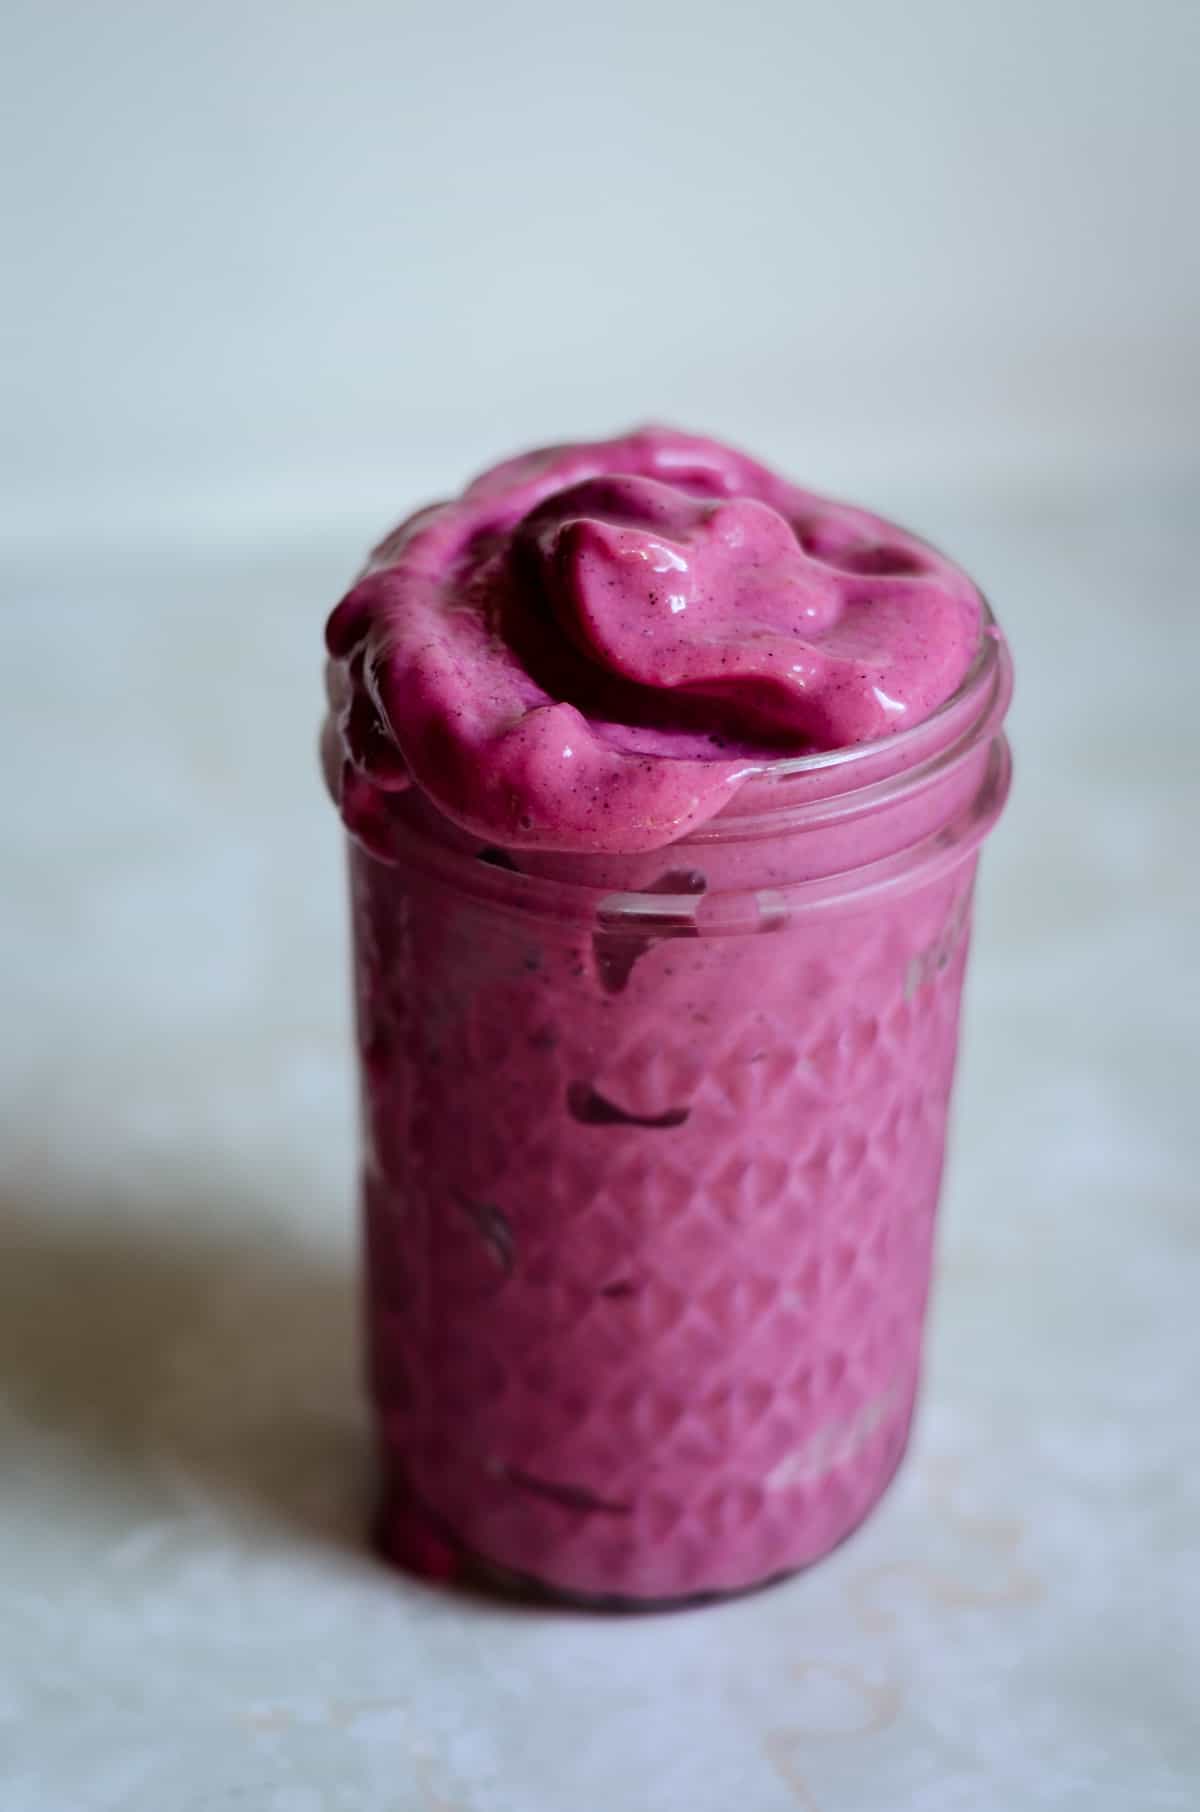 Pink thick smoothie in a jar on the counter ready for breakfast.